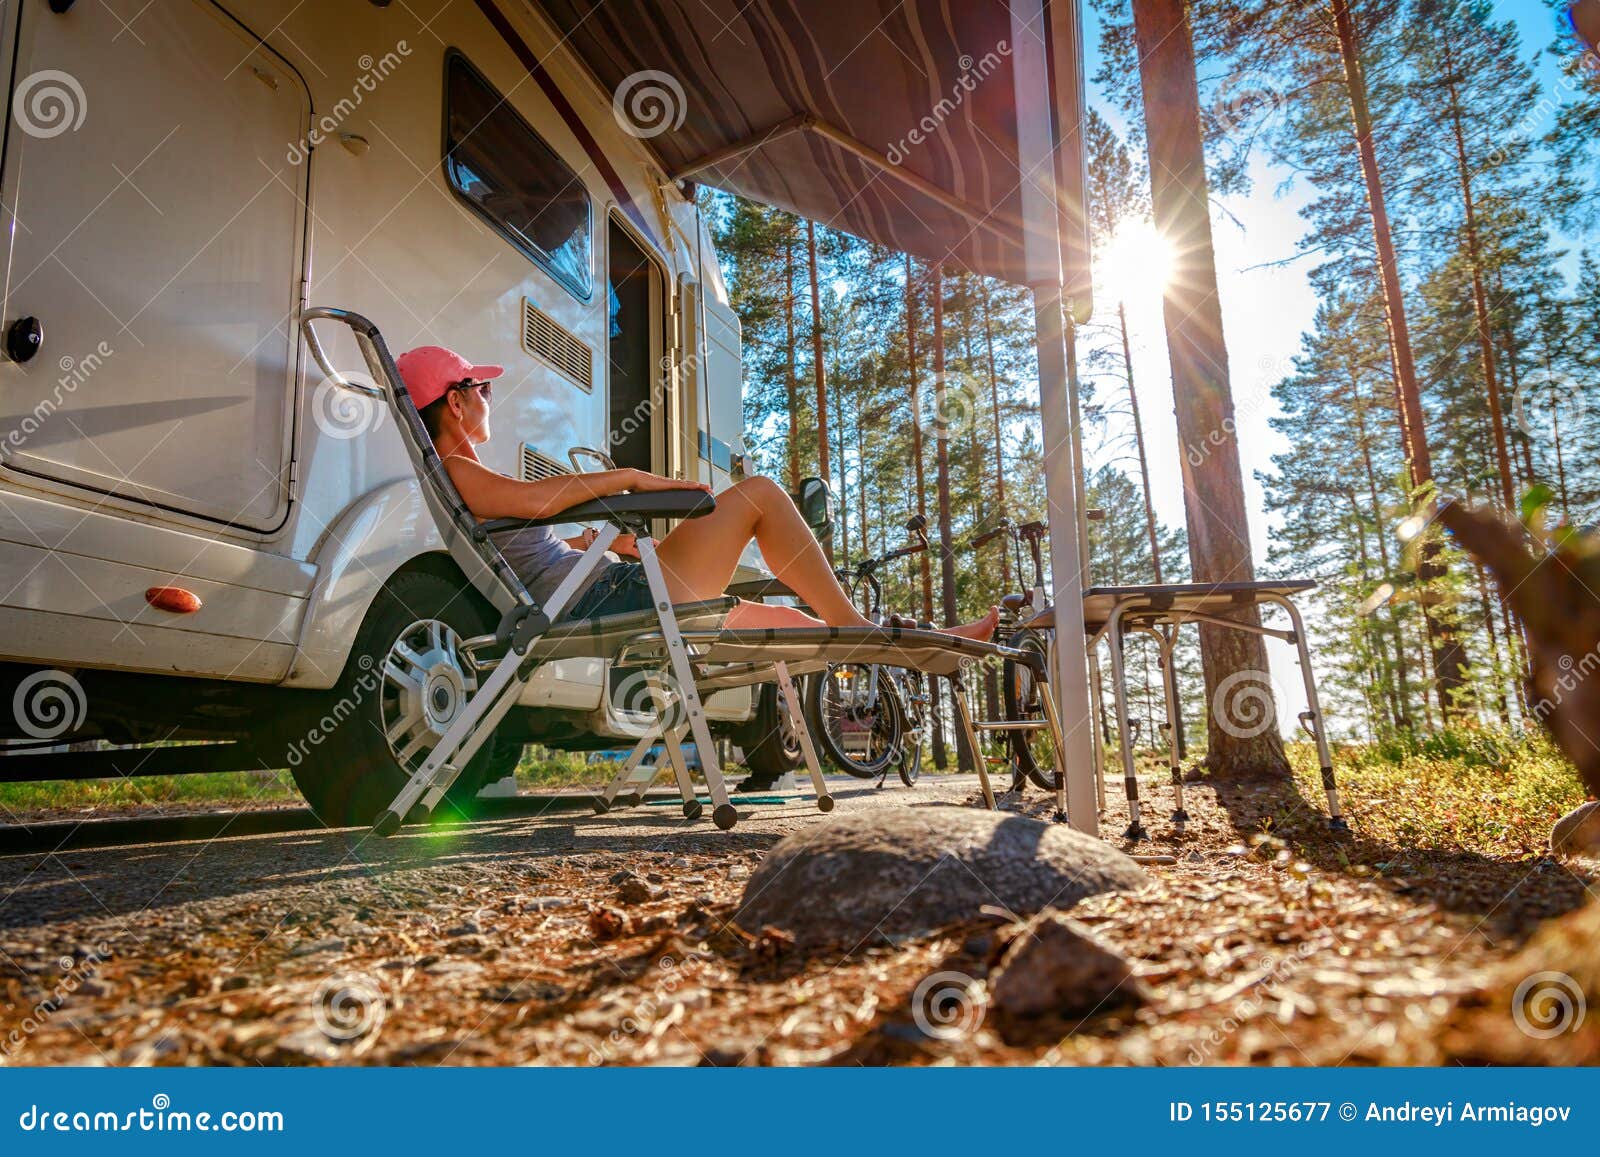 family vacation travel rv, holiday trip in motorhome